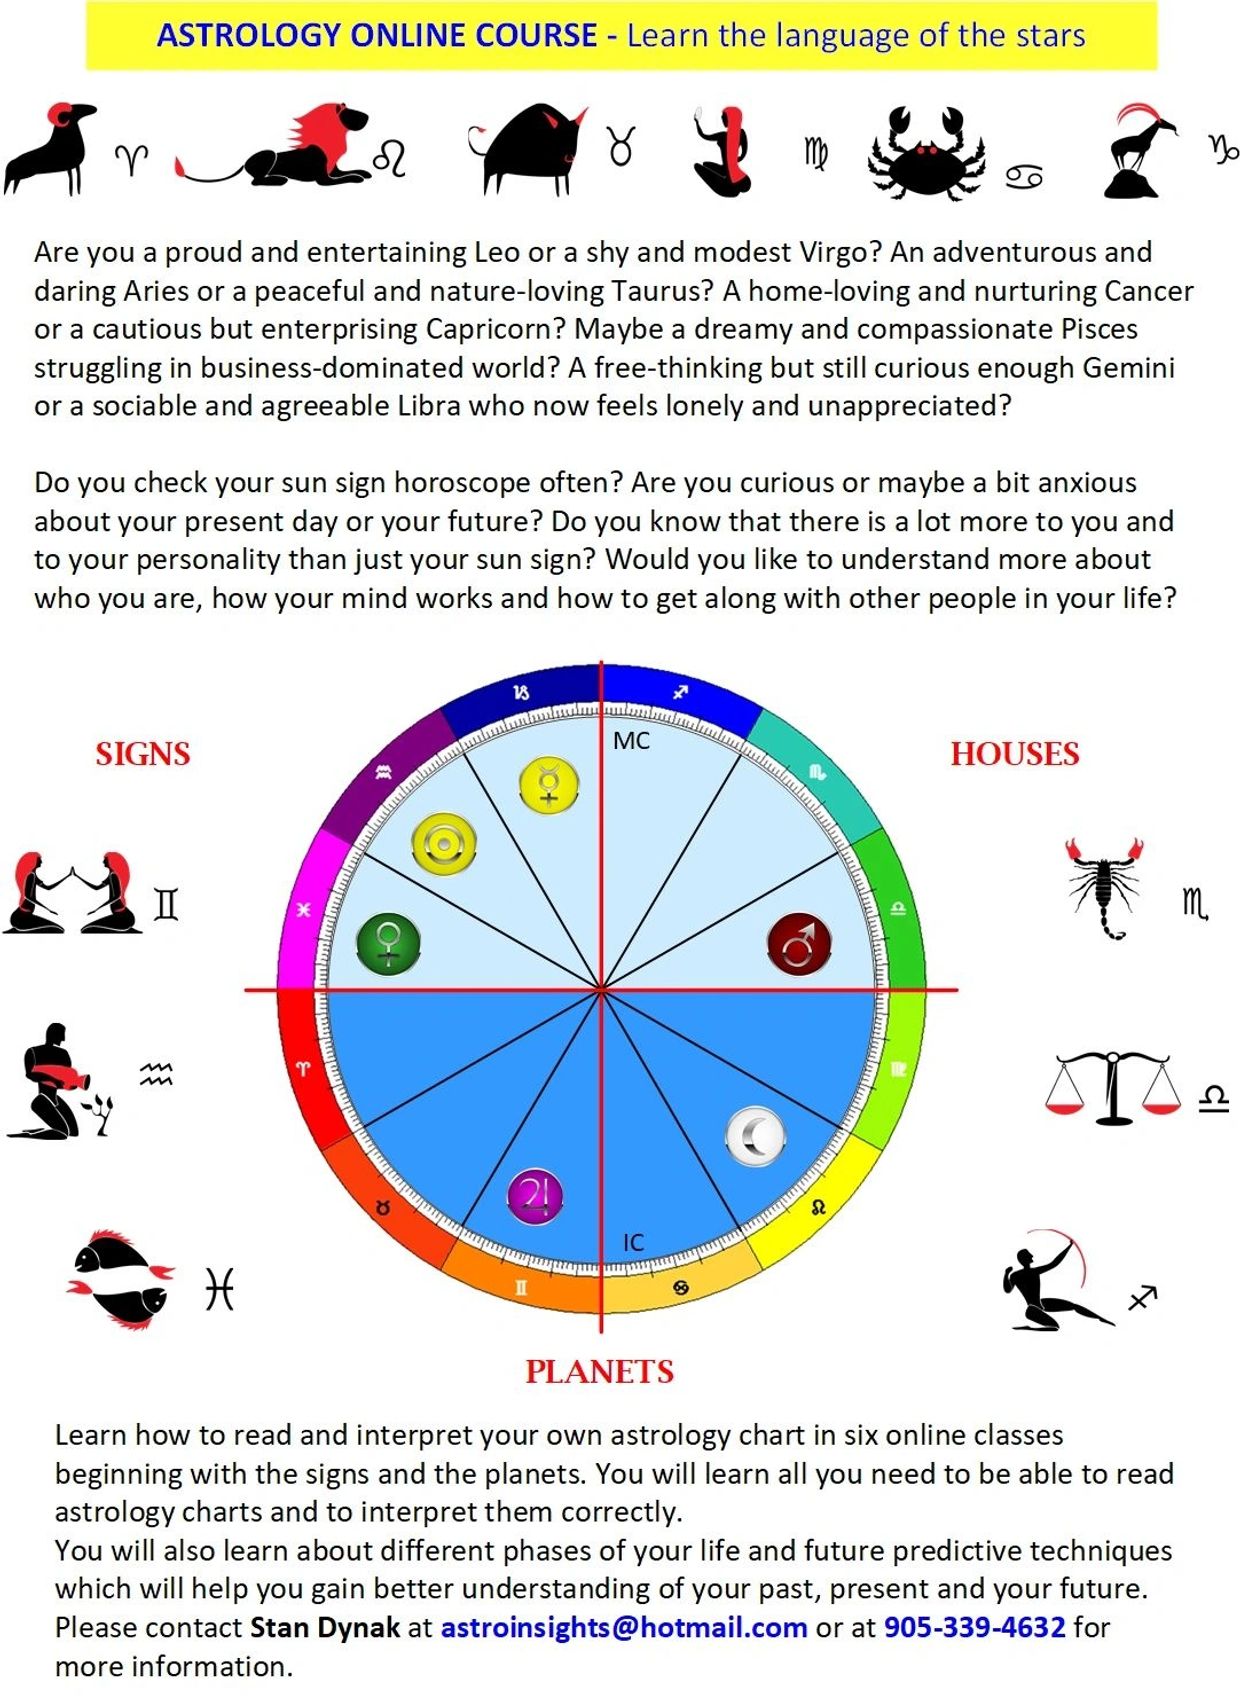 How to Learn Astrology Online?